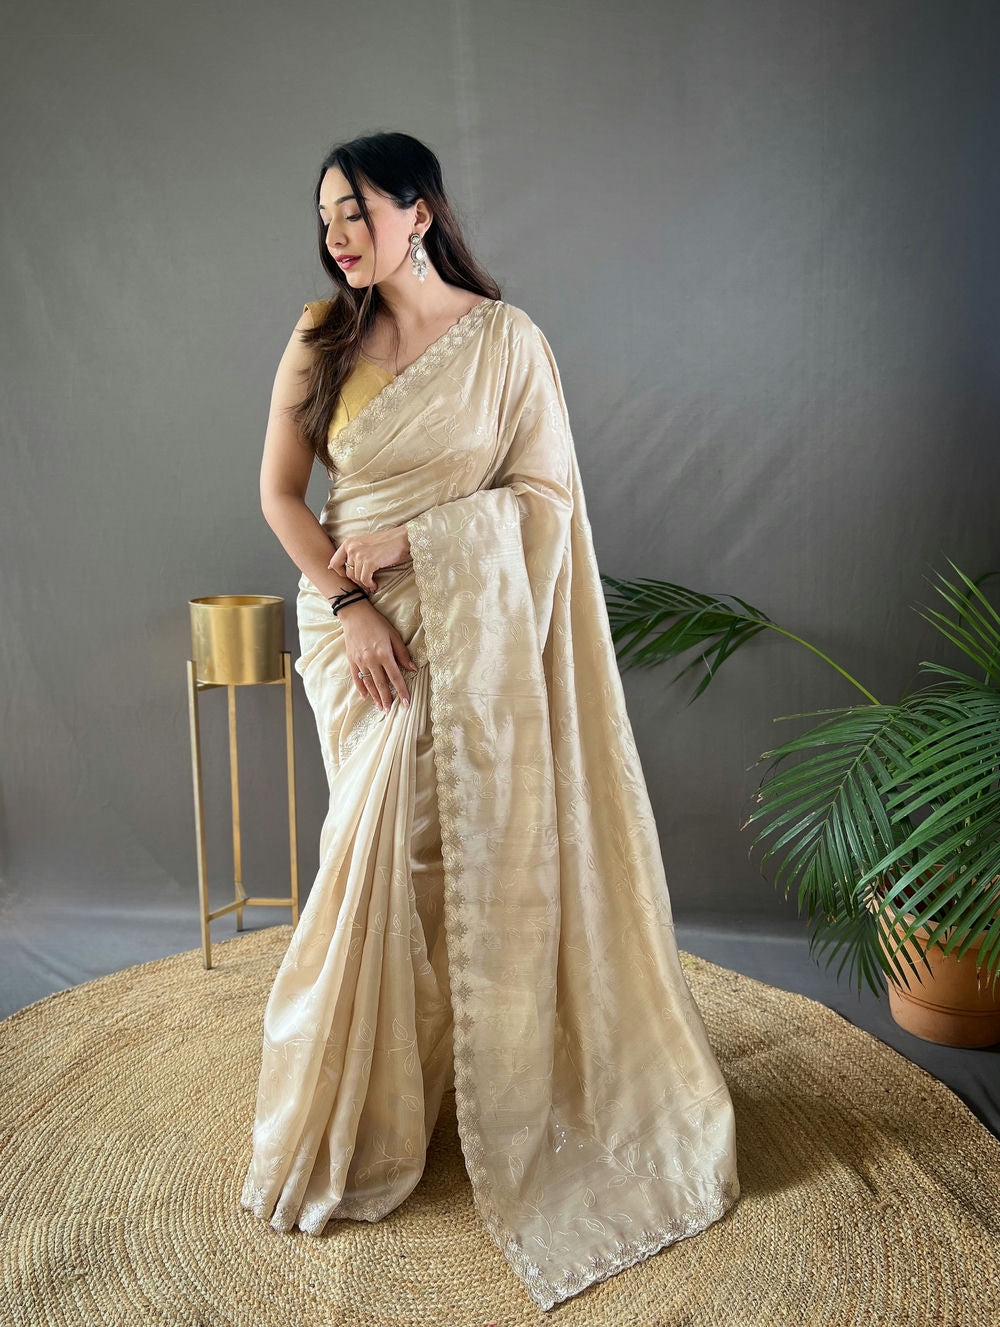 OFF WHITE PURE RUHI SILK SAREE WITH ALL OVER JAL WORK 